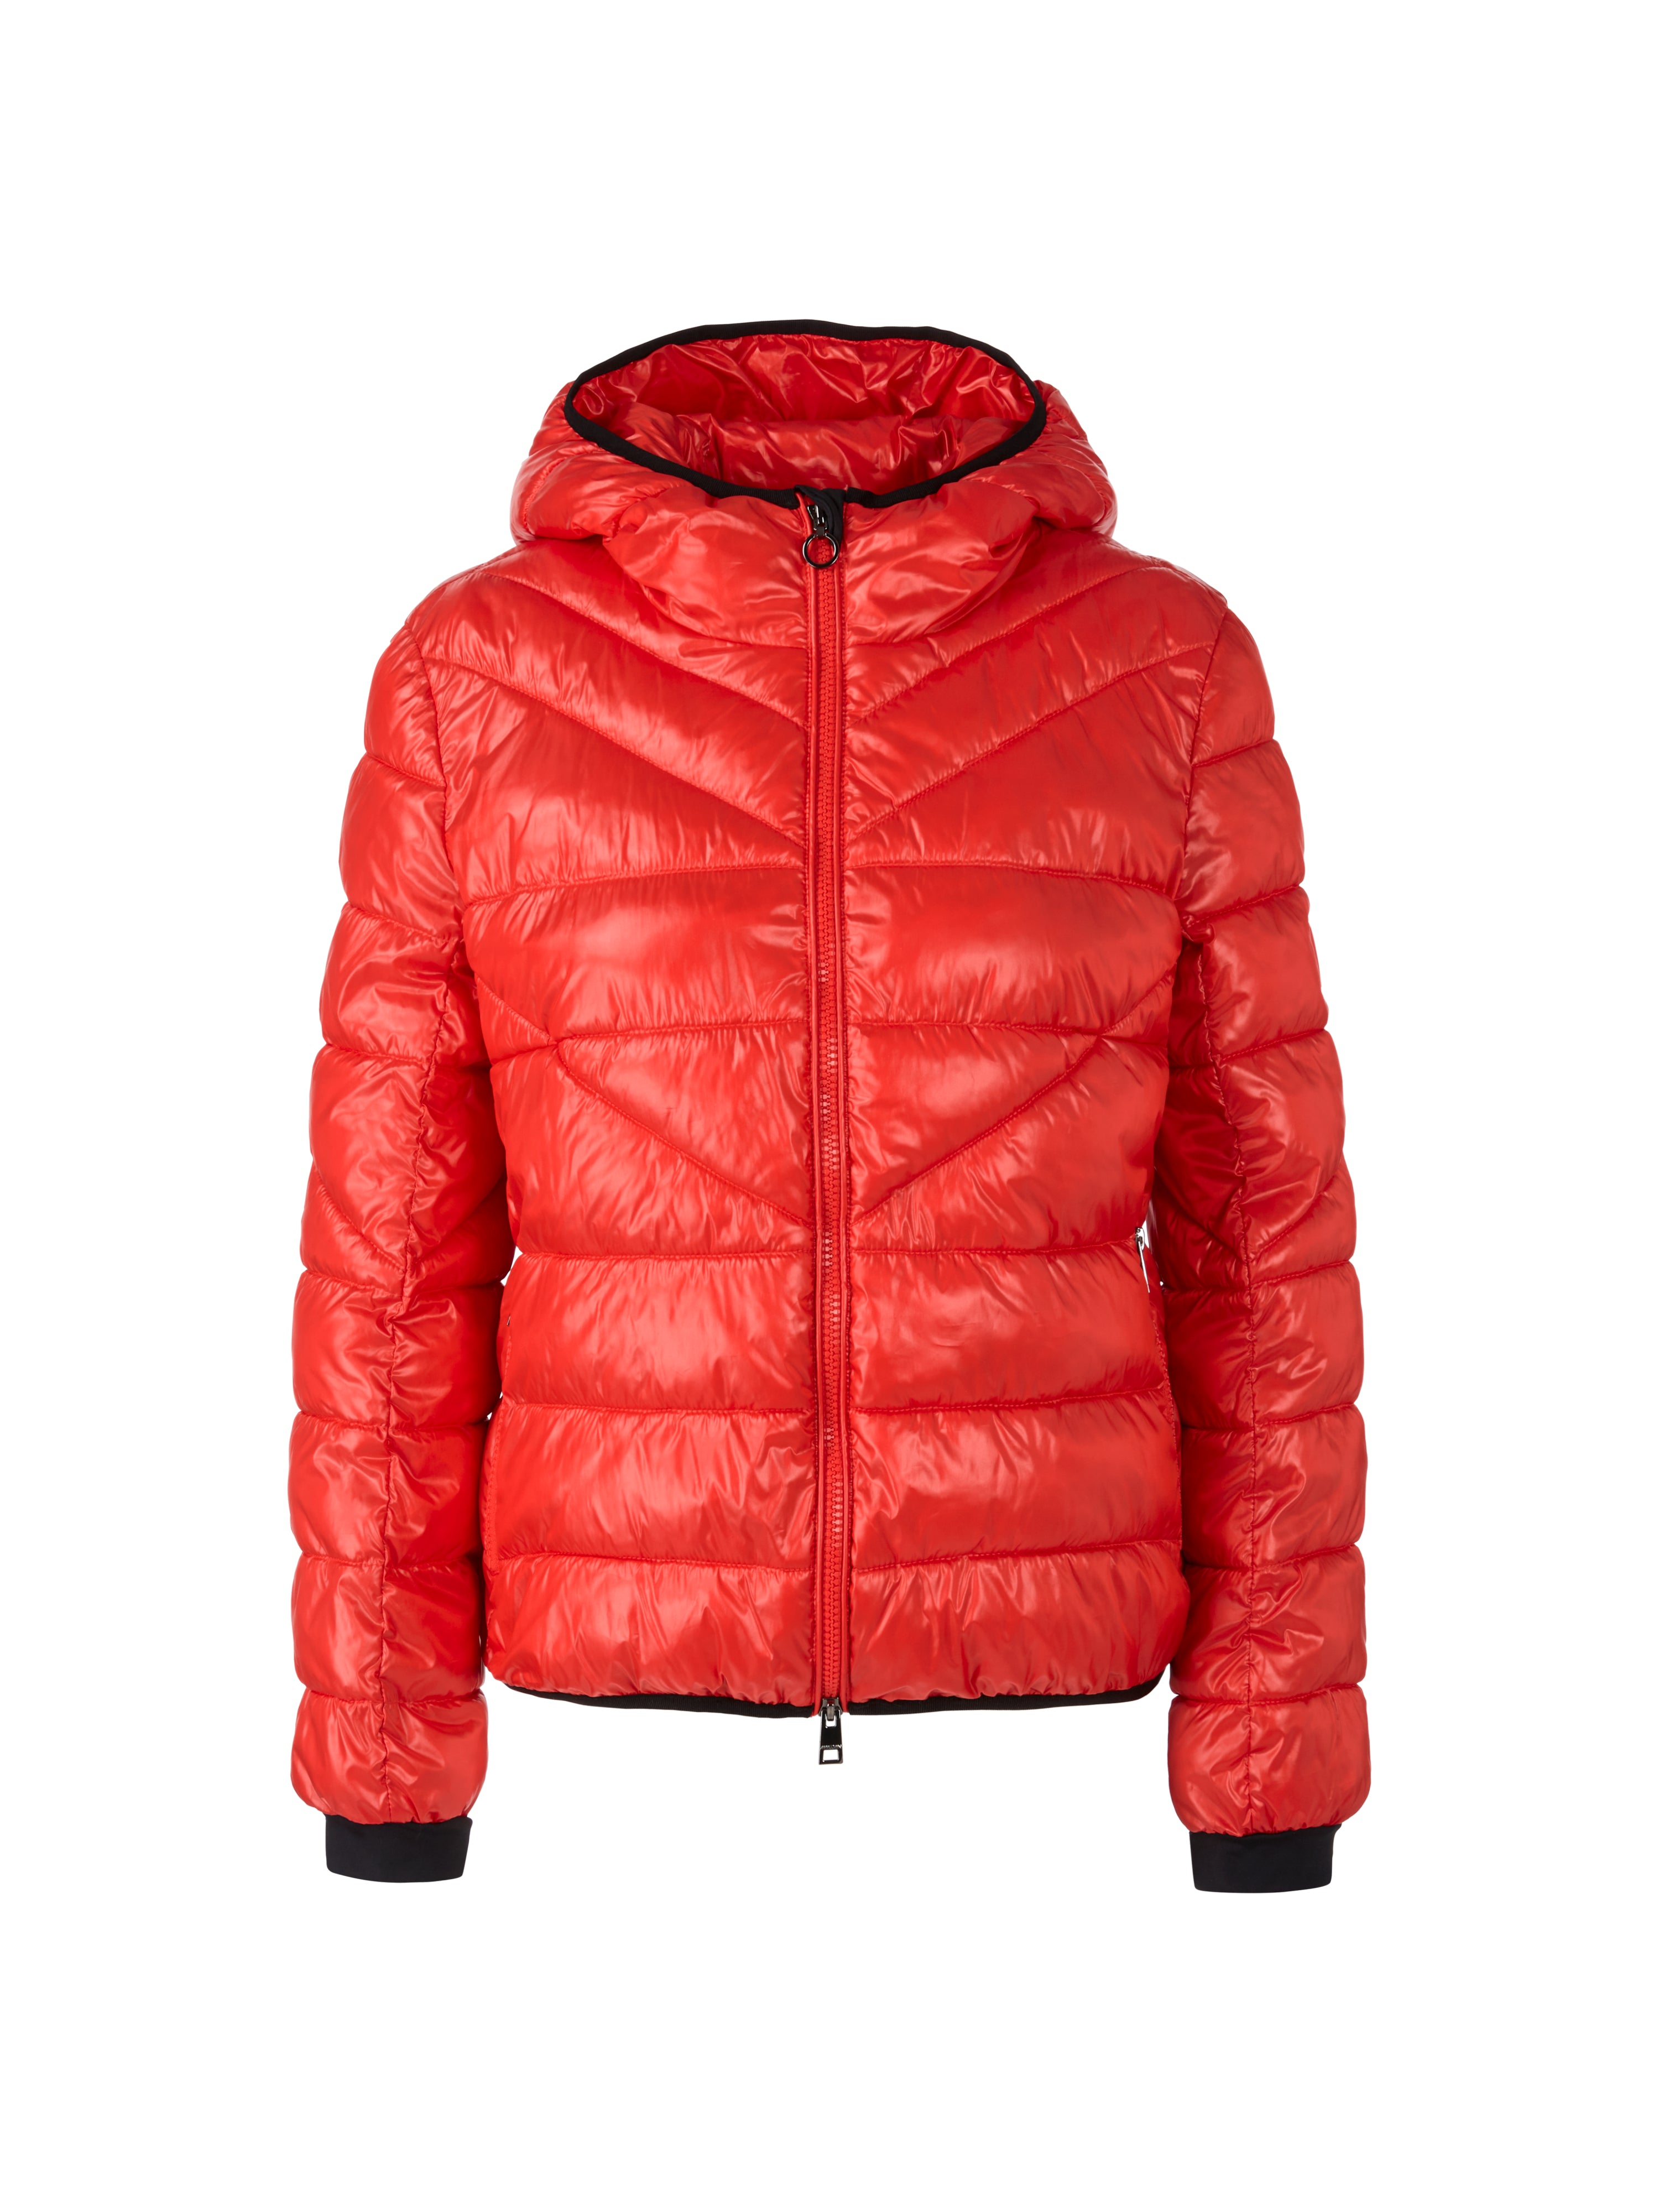 Campari Quilted Puffer Jacket